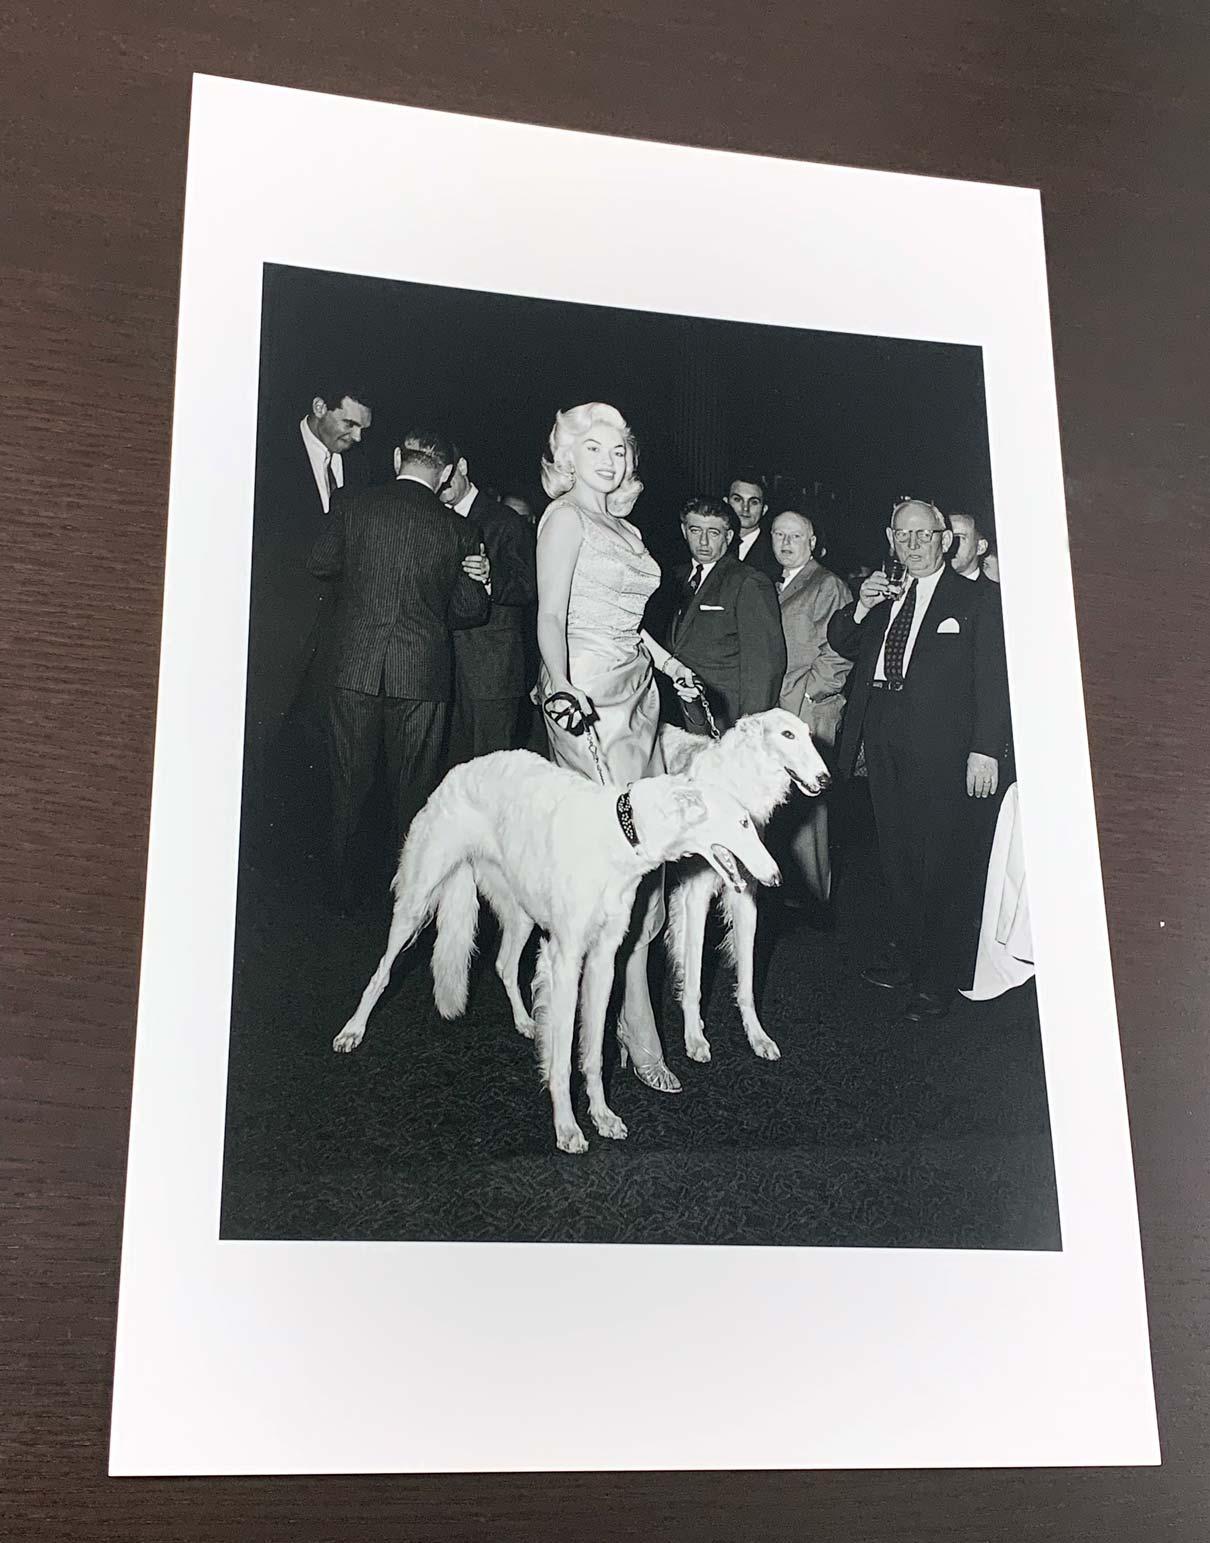 Jayne Mansfield with Seagrams Dogs (Limited Edition of 10, No 6-10) - 30